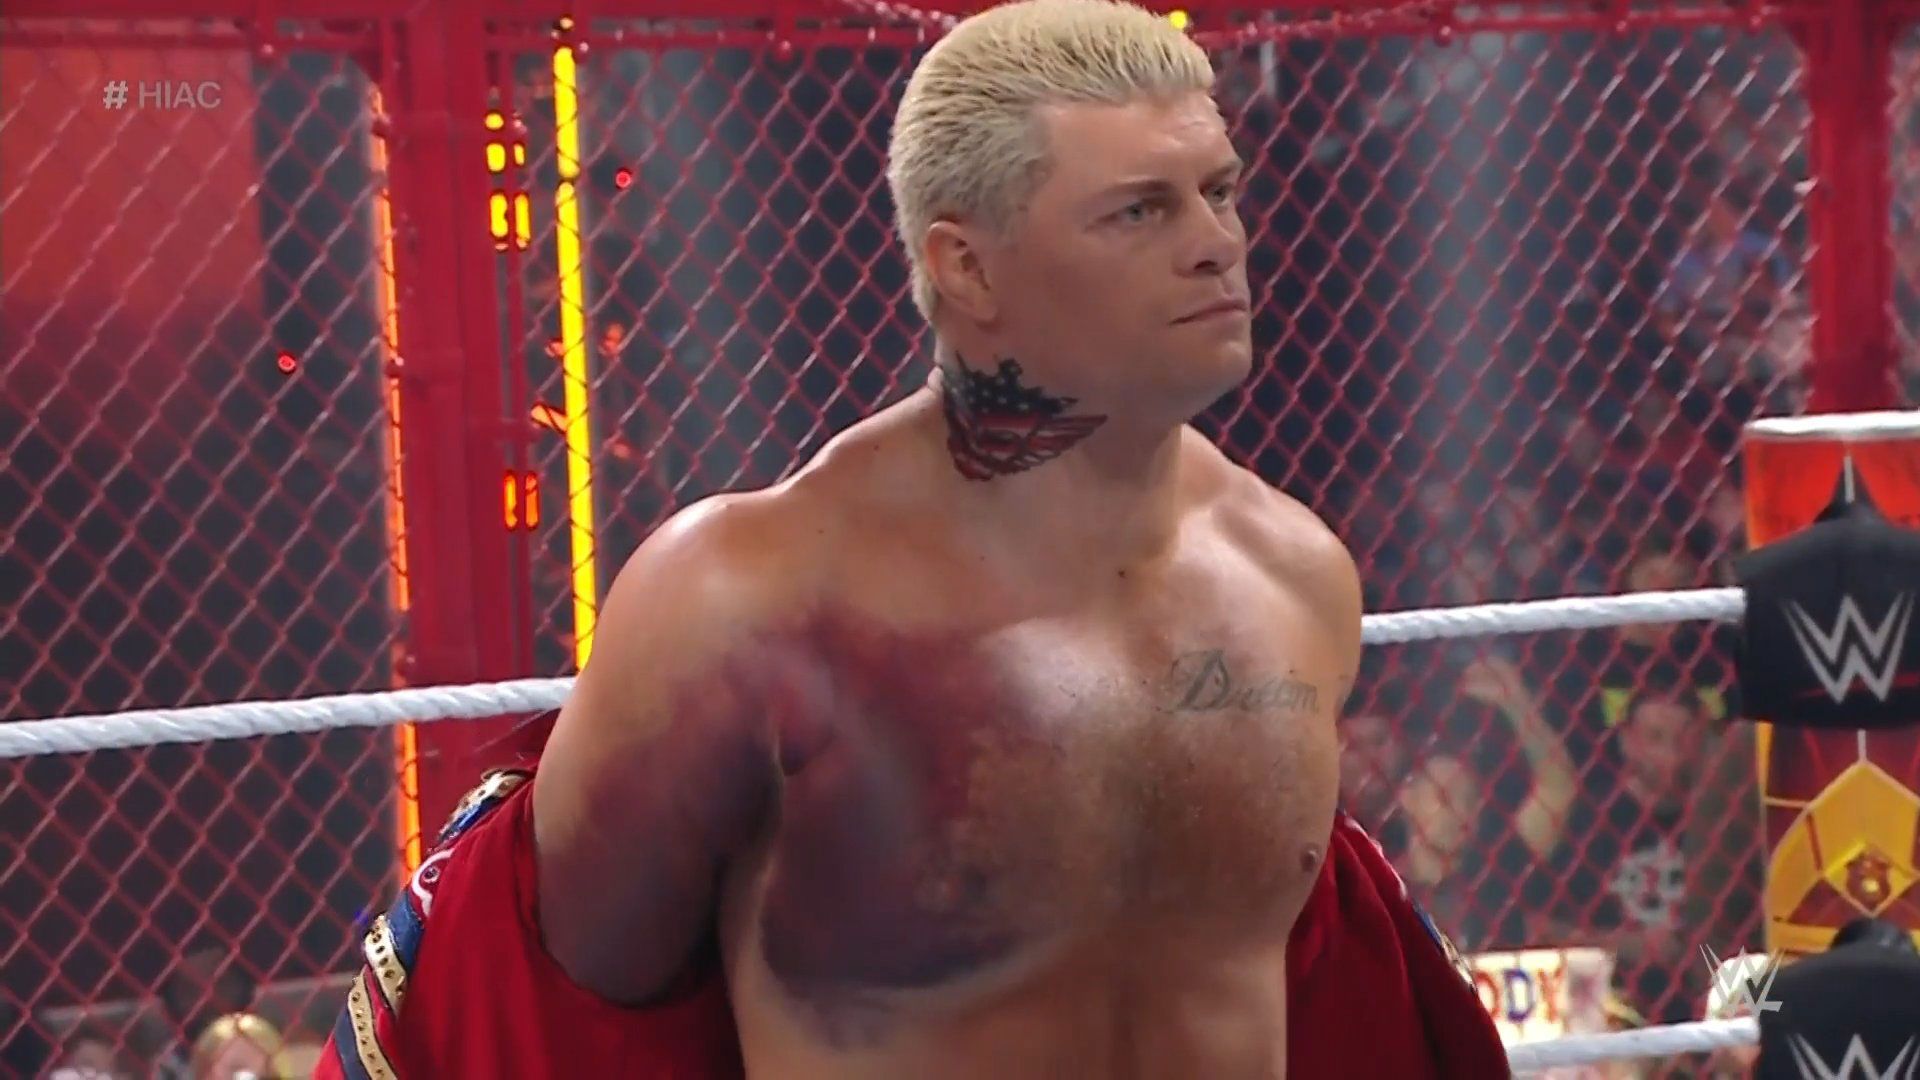 Cody Rhodes reveals a gruesome pectoral injury ahead of his fight against Seth Rollins.